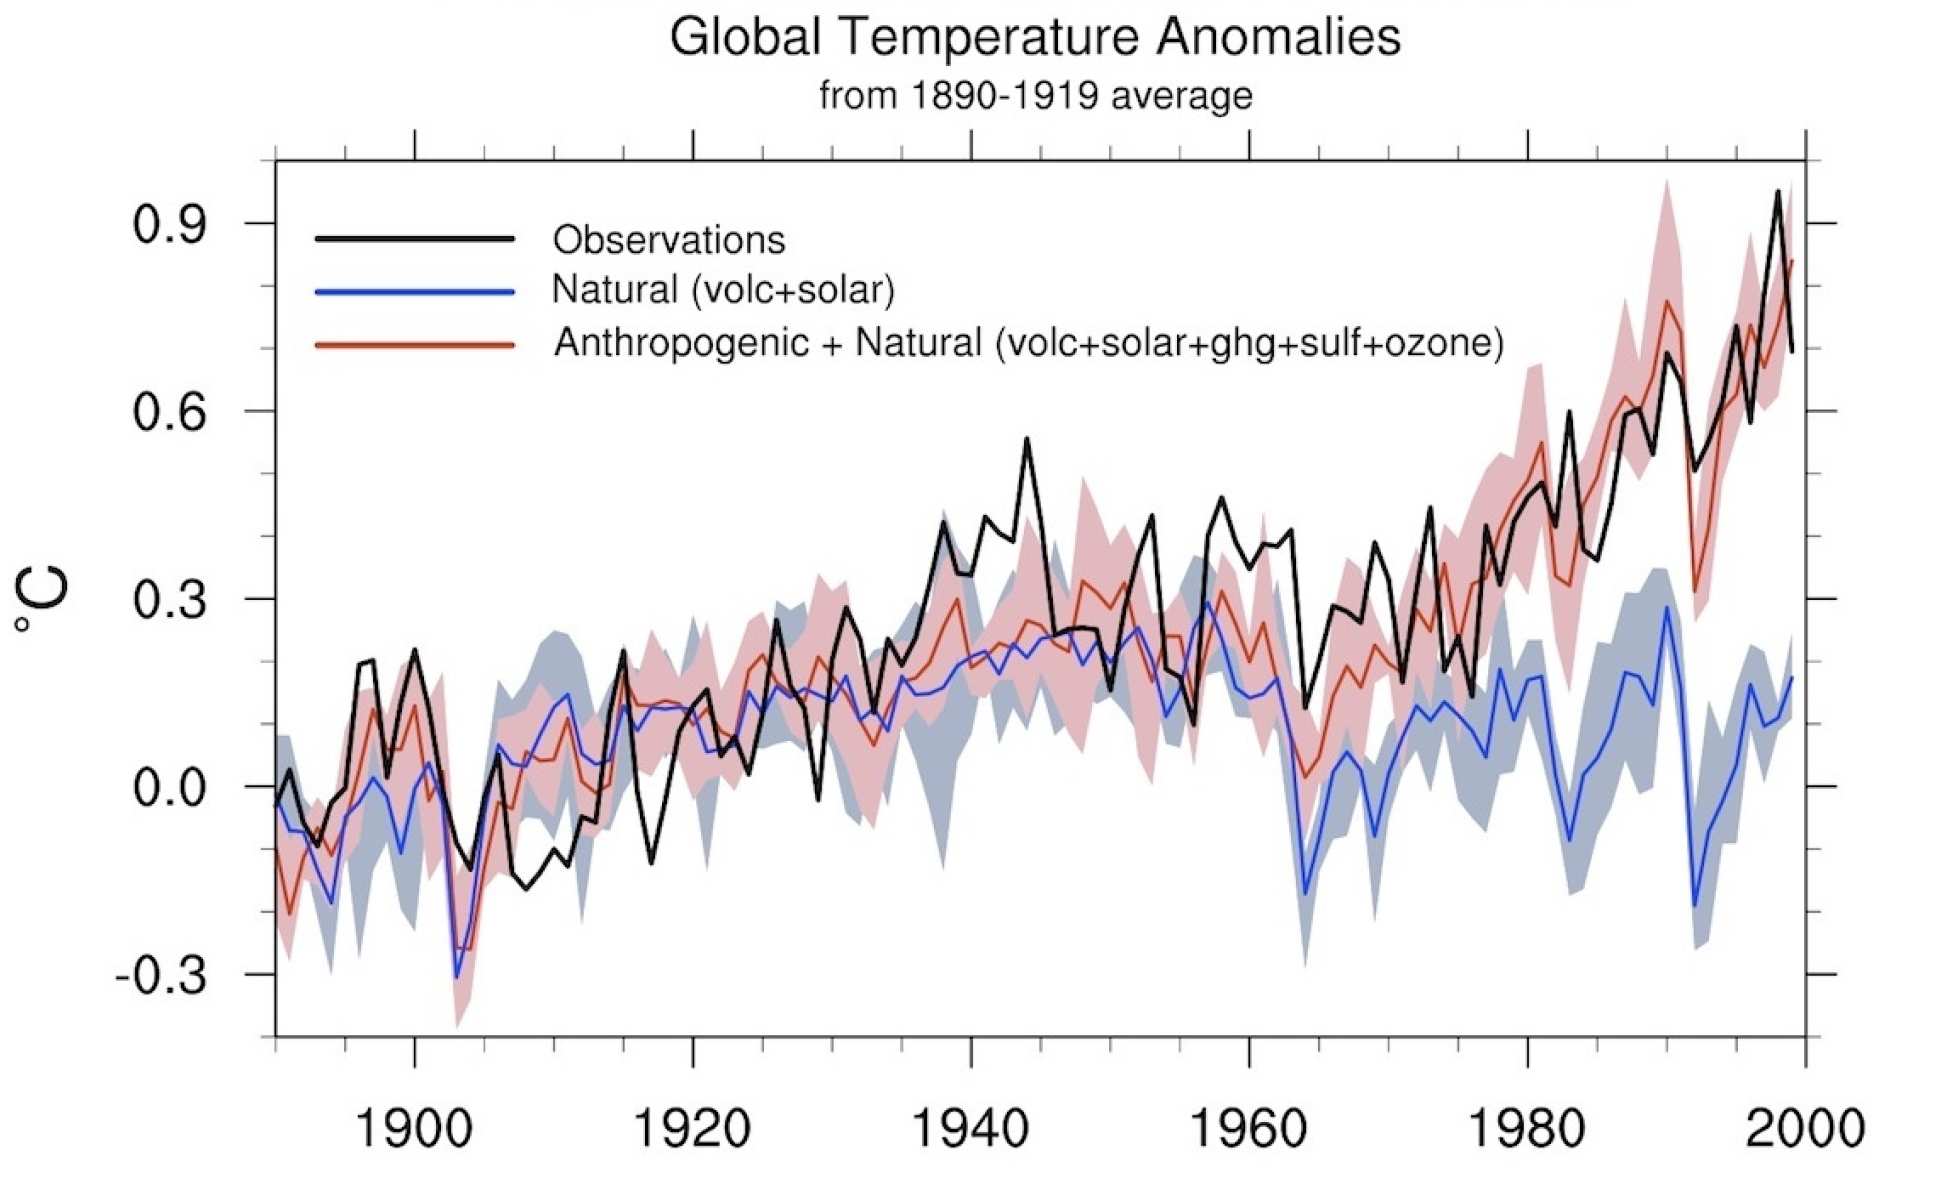 A figure showing global temperature difference relative to the 1890-1919 baseline. It shows the observed temperature difference until year 2000, a simulation of what the temperature difference would have been if only natural forces were taken into account, and a simulated temperature difference if both human and natural factors are taken into account. It reveals how the average global temperature increase can only be explained when human factors are taken into account.